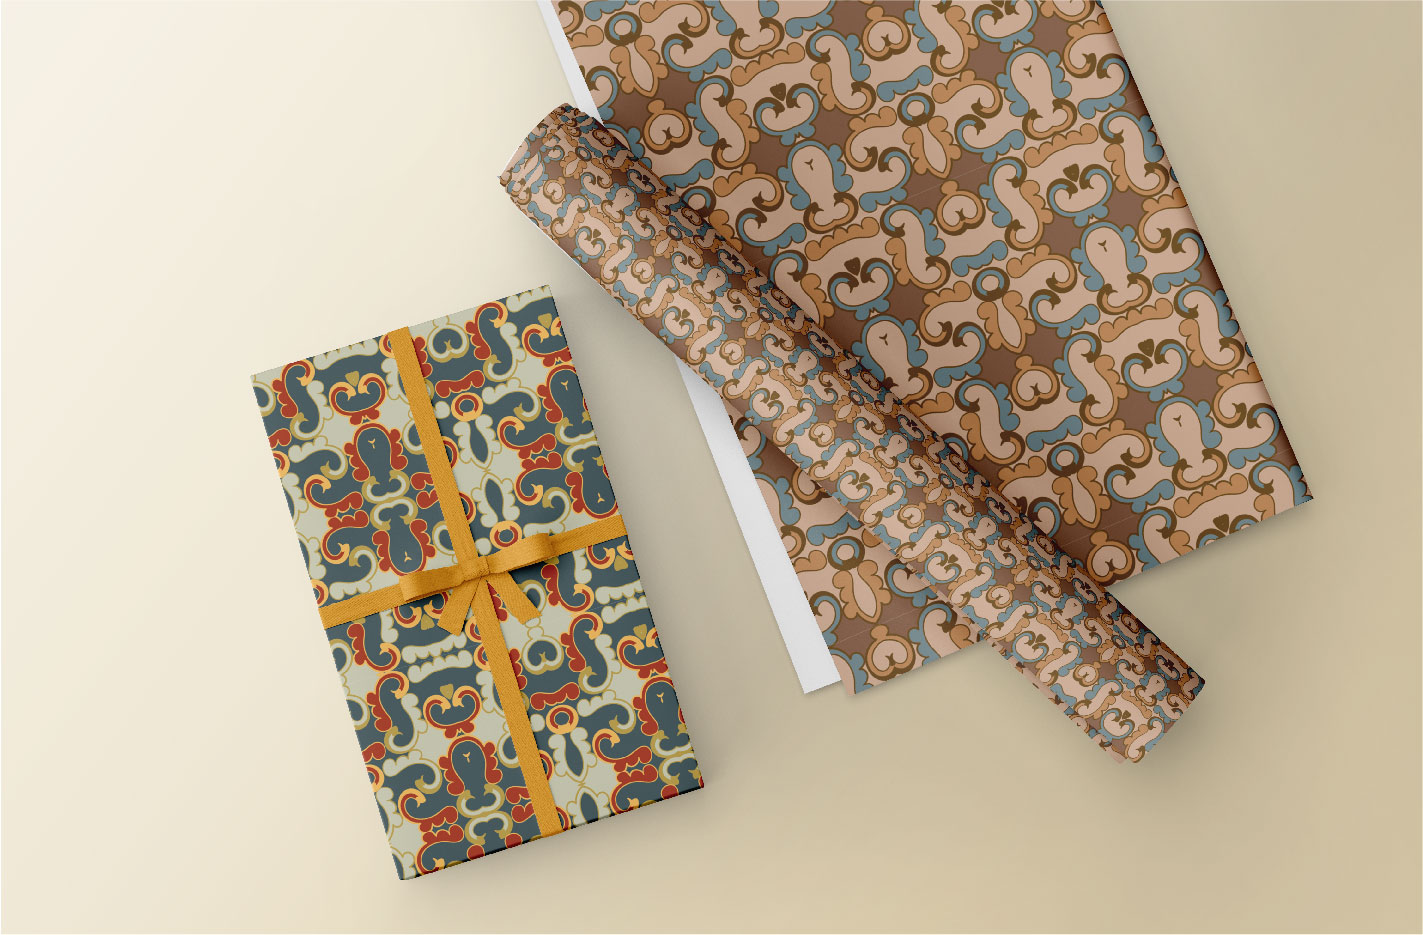 Gift wrapped in a brown and blue patterned paper.